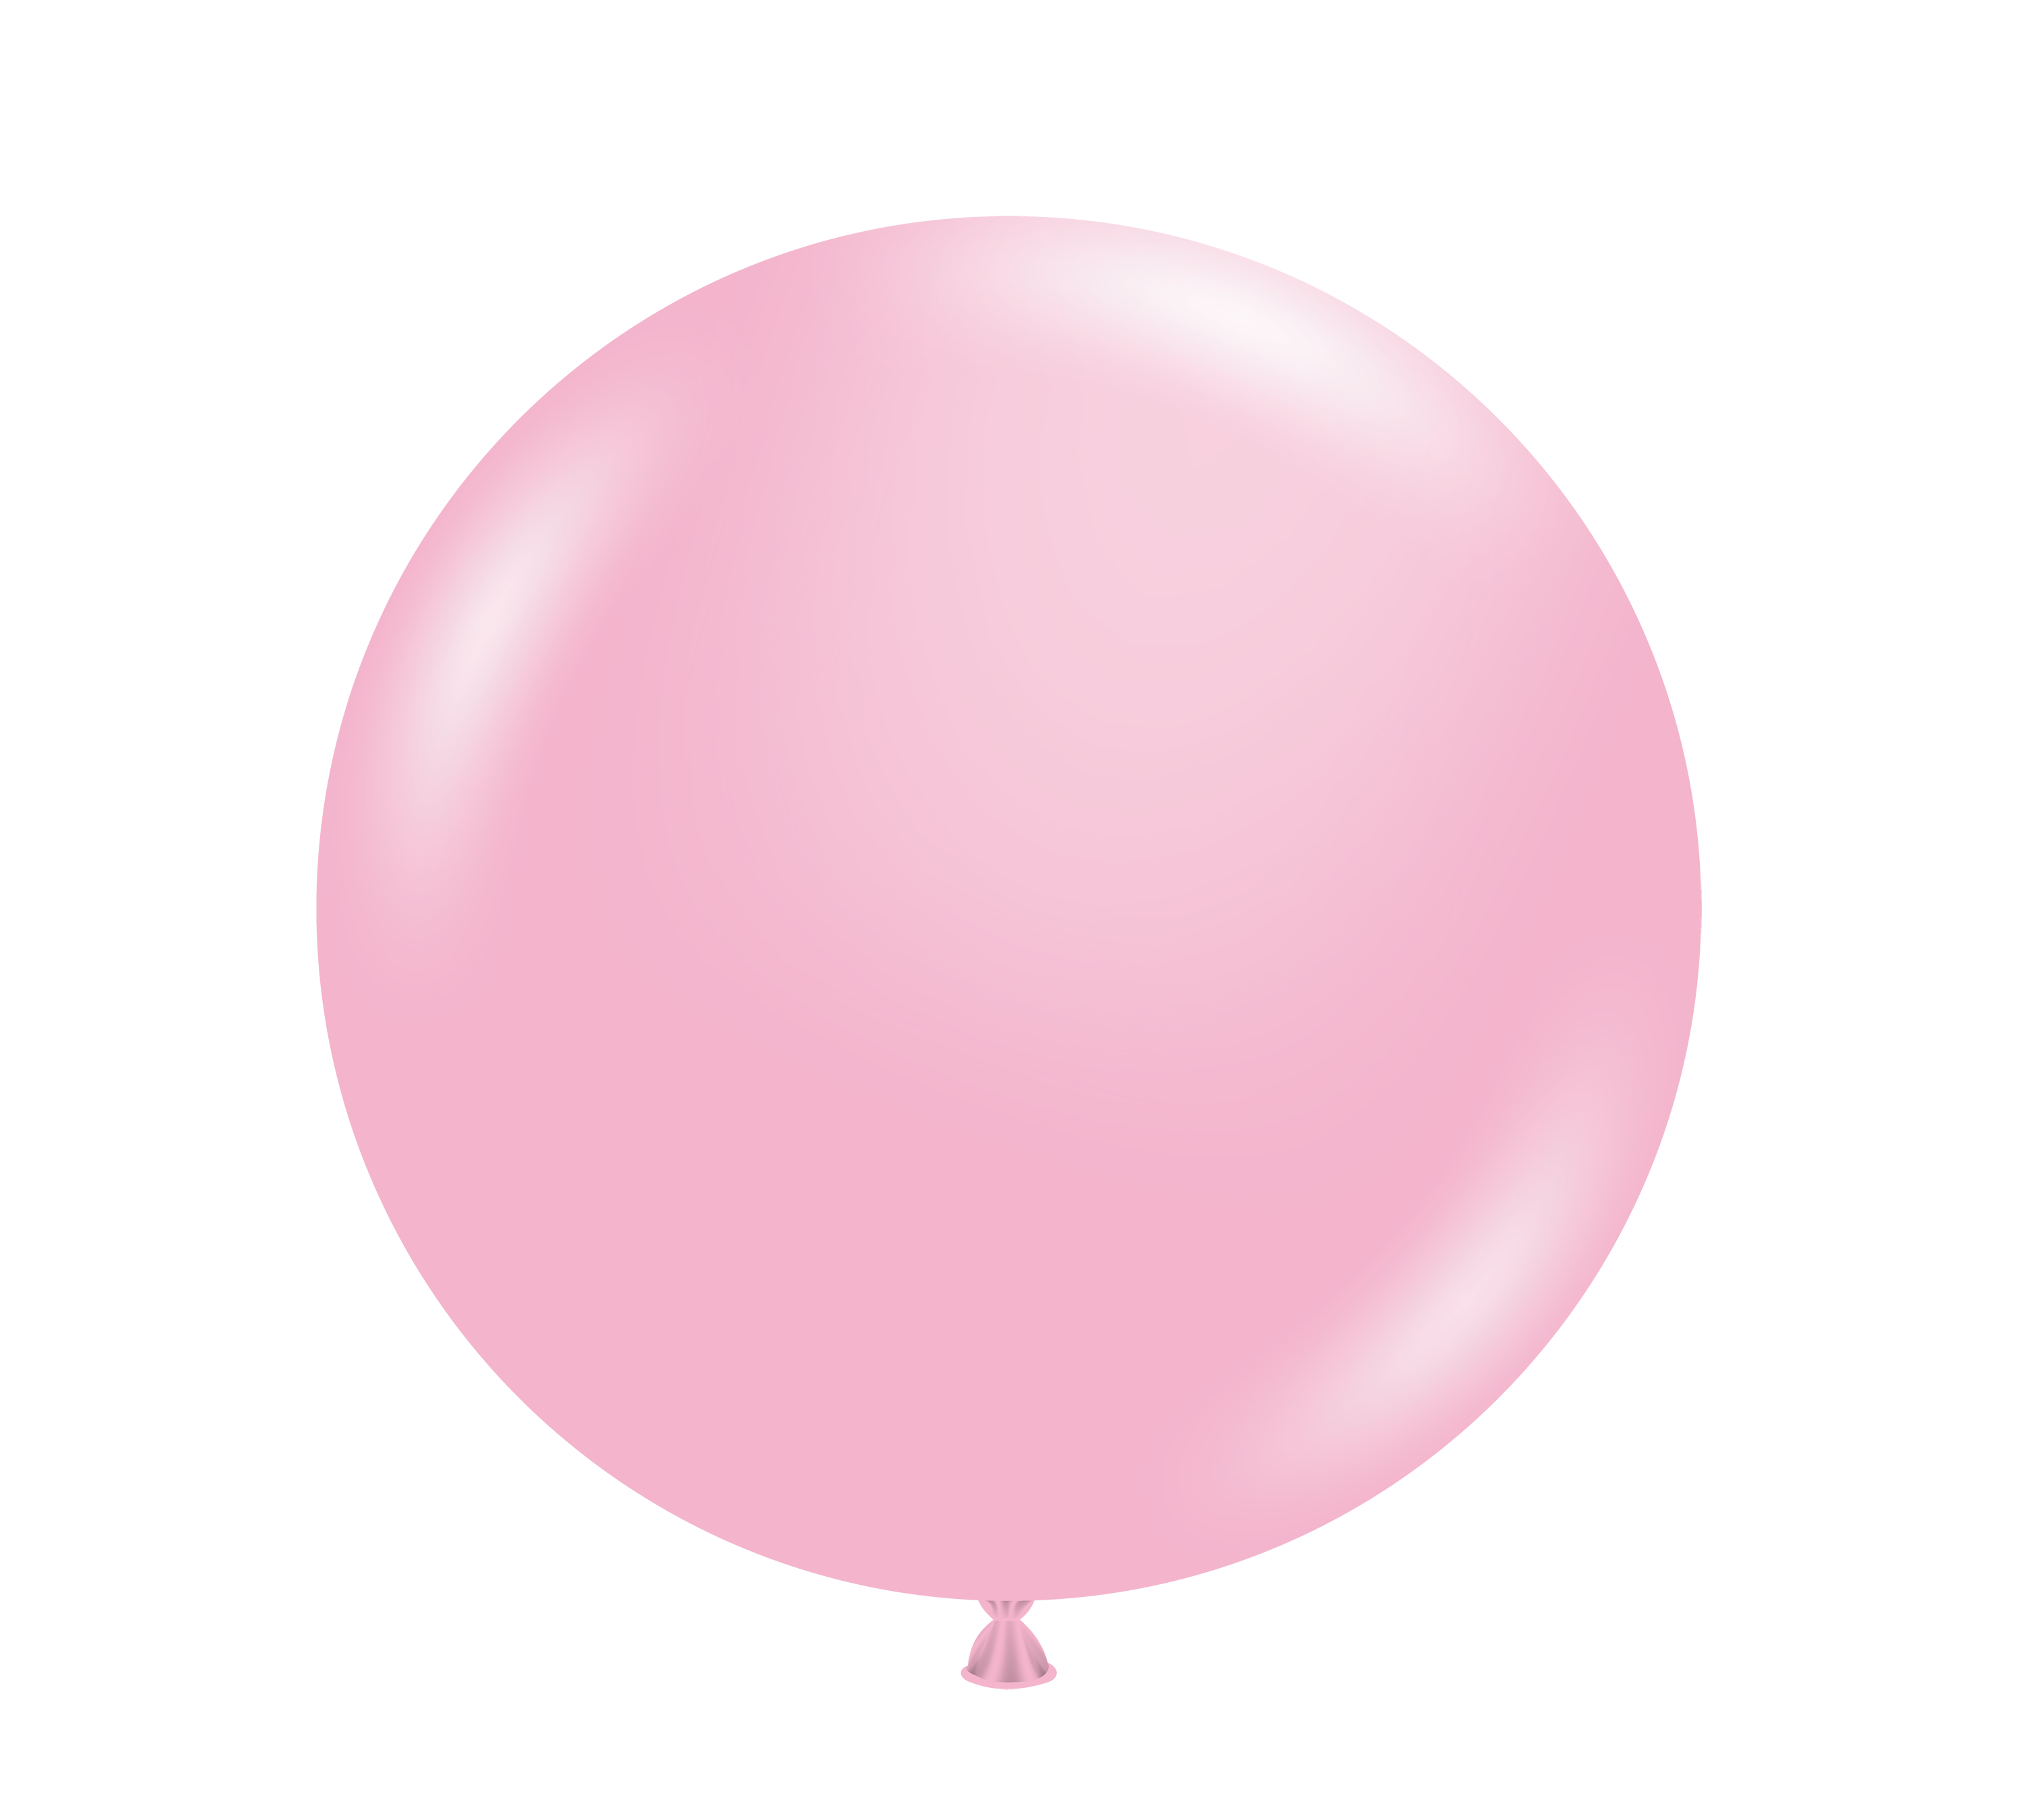 24" TUFTEX Baby Pink Latex Balloons | 25 Count